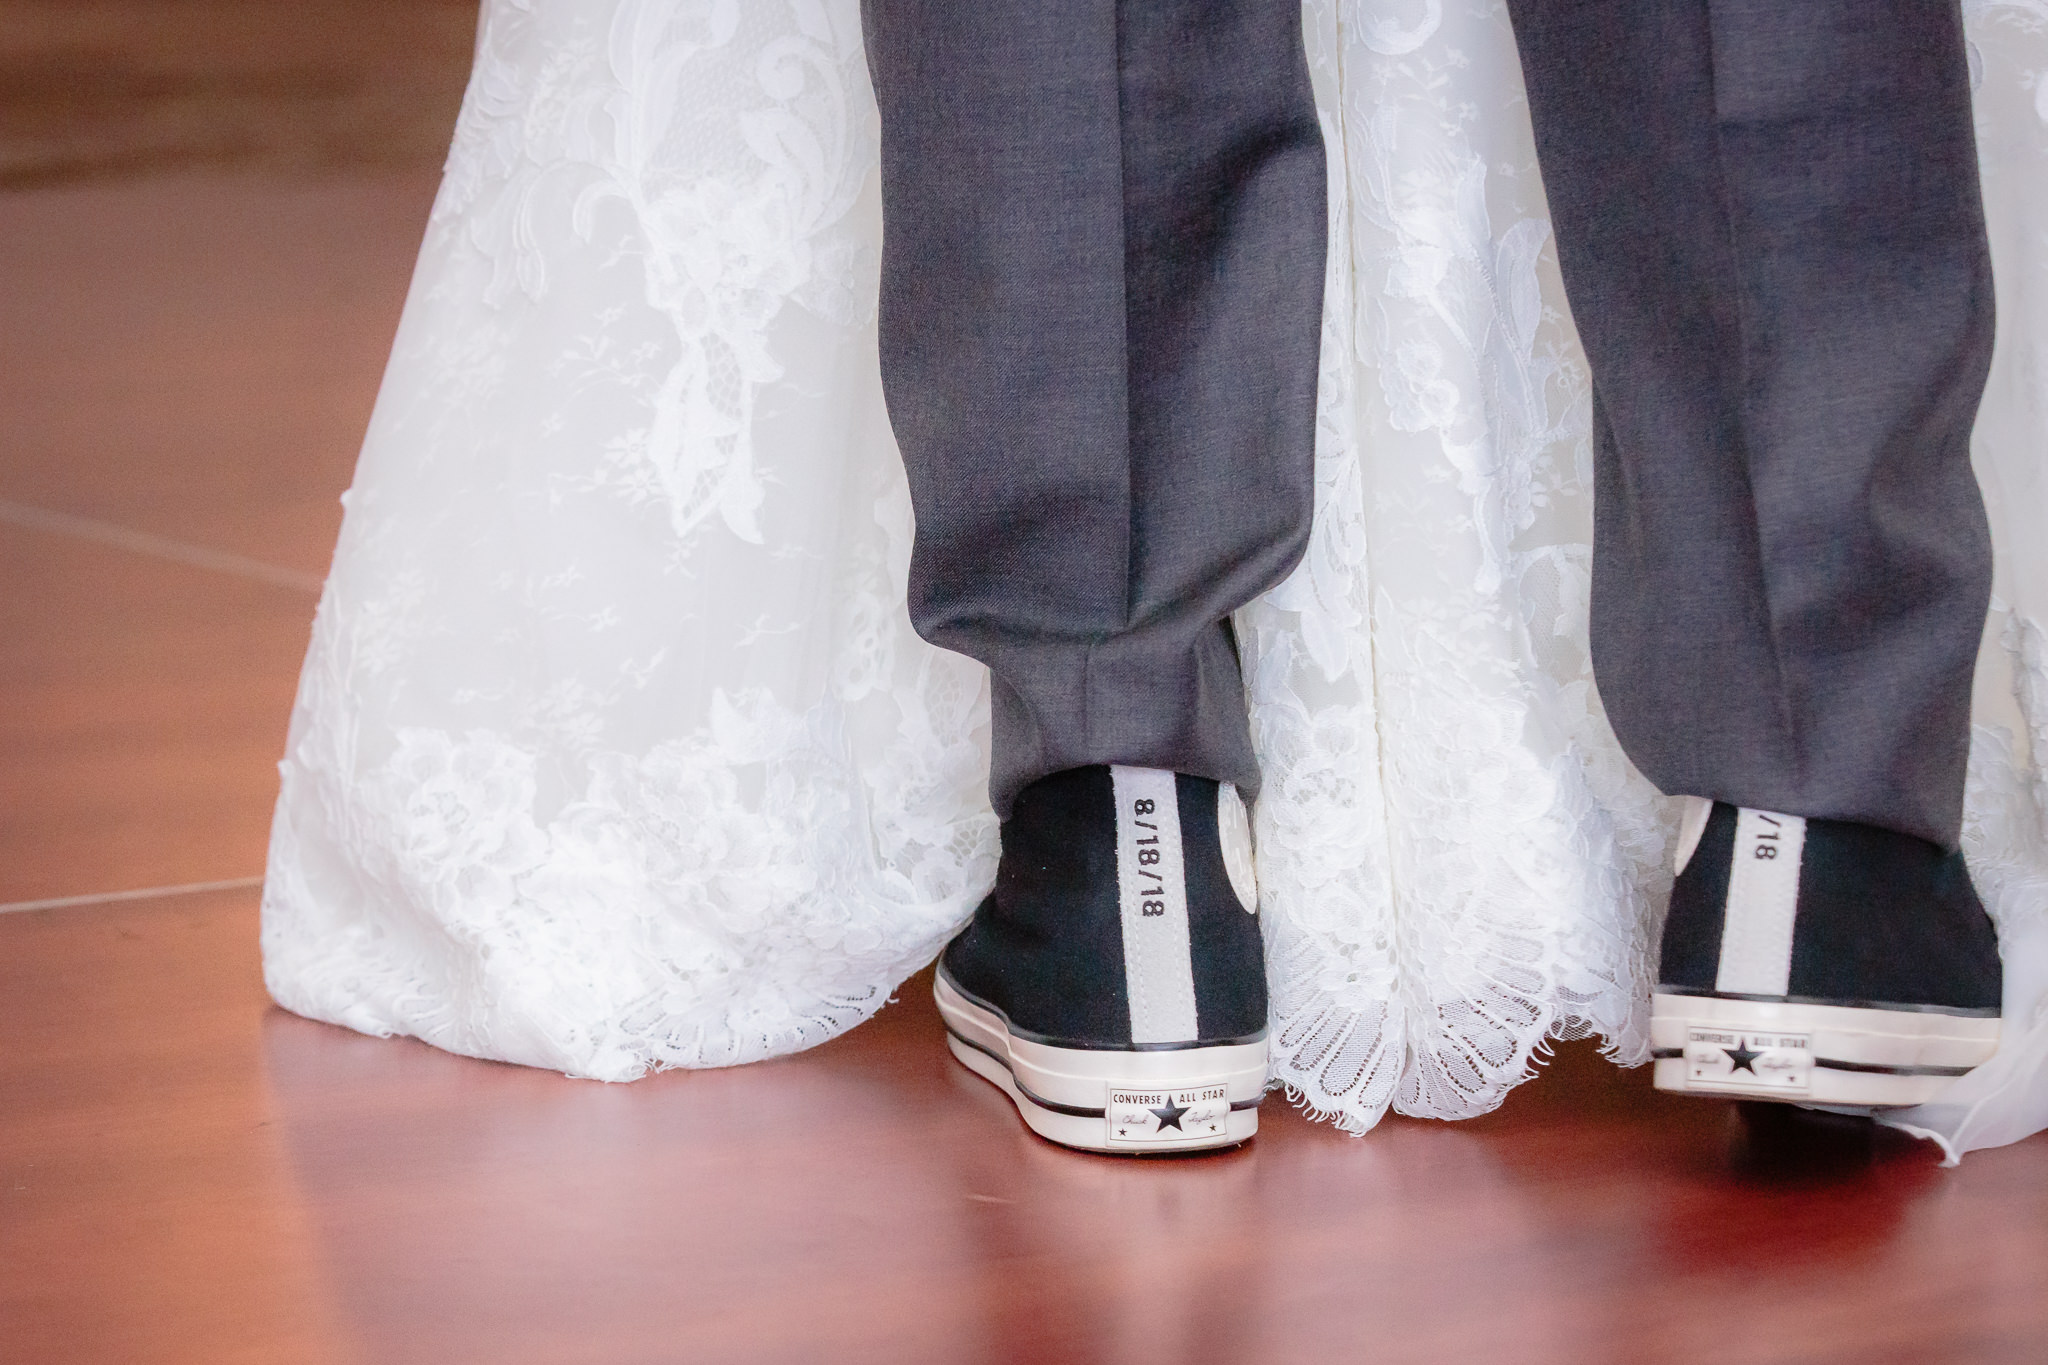 Groom's custom Converse All Stars during his first dance at the Pittsburgh Airport Marriott